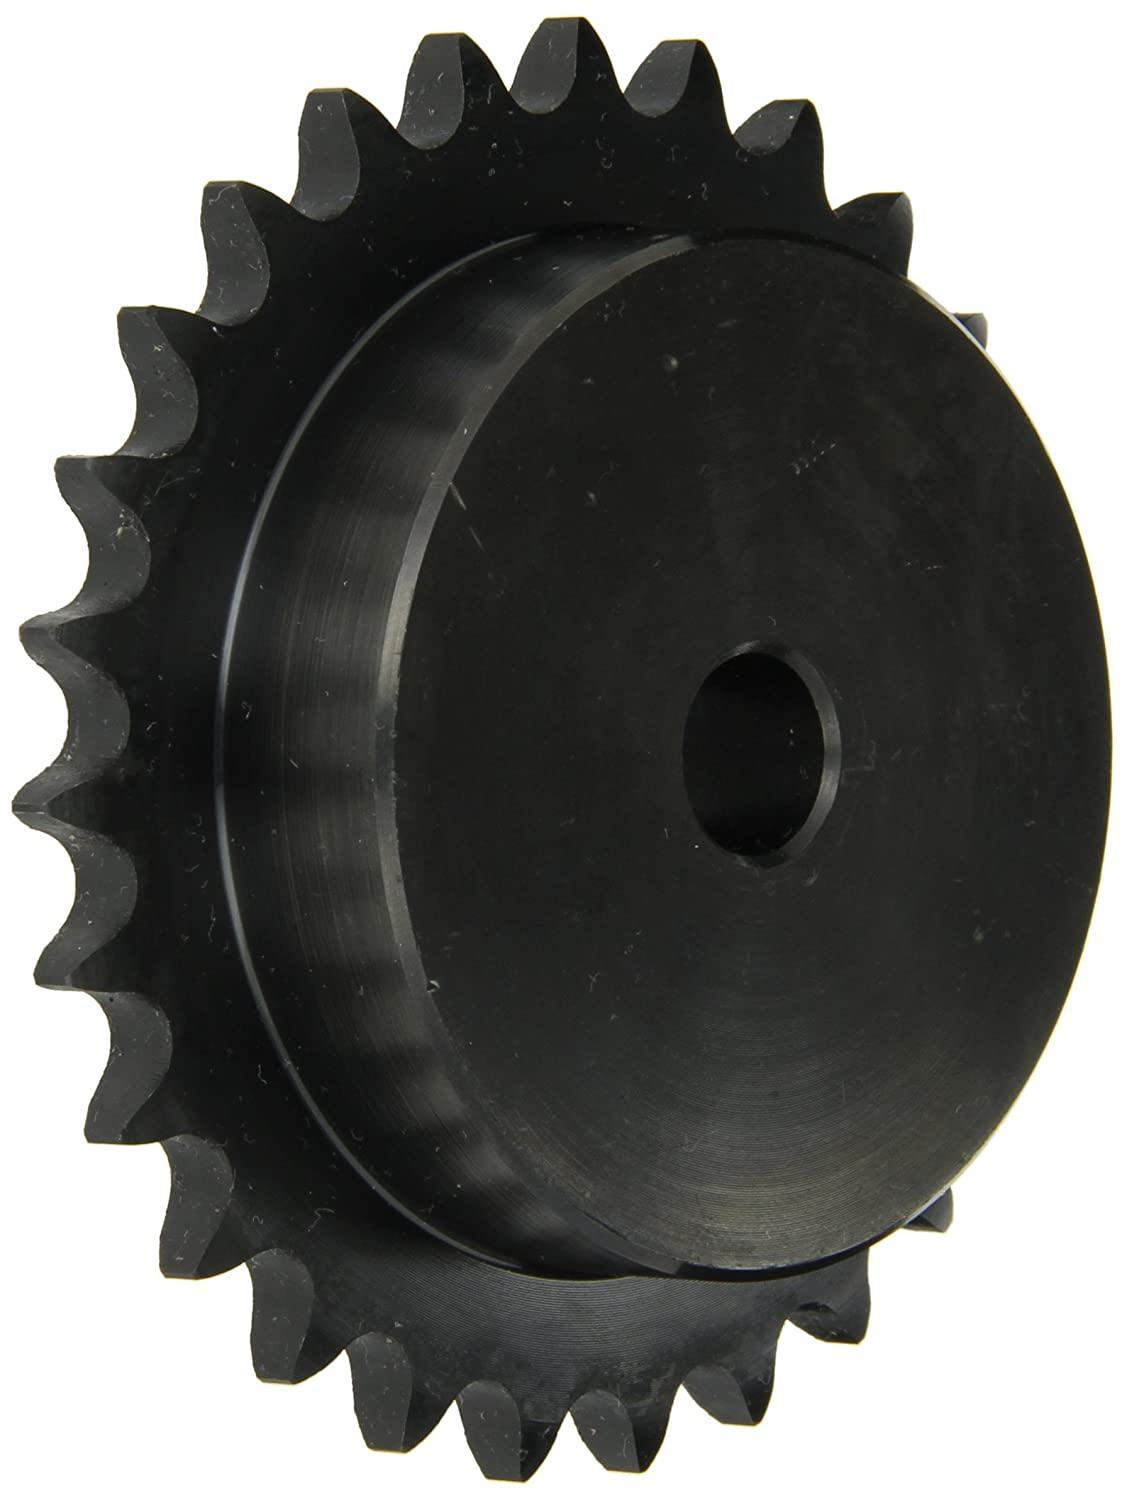 25B60 Roller Chain Sprocket With Stock Bore - Forces Inc